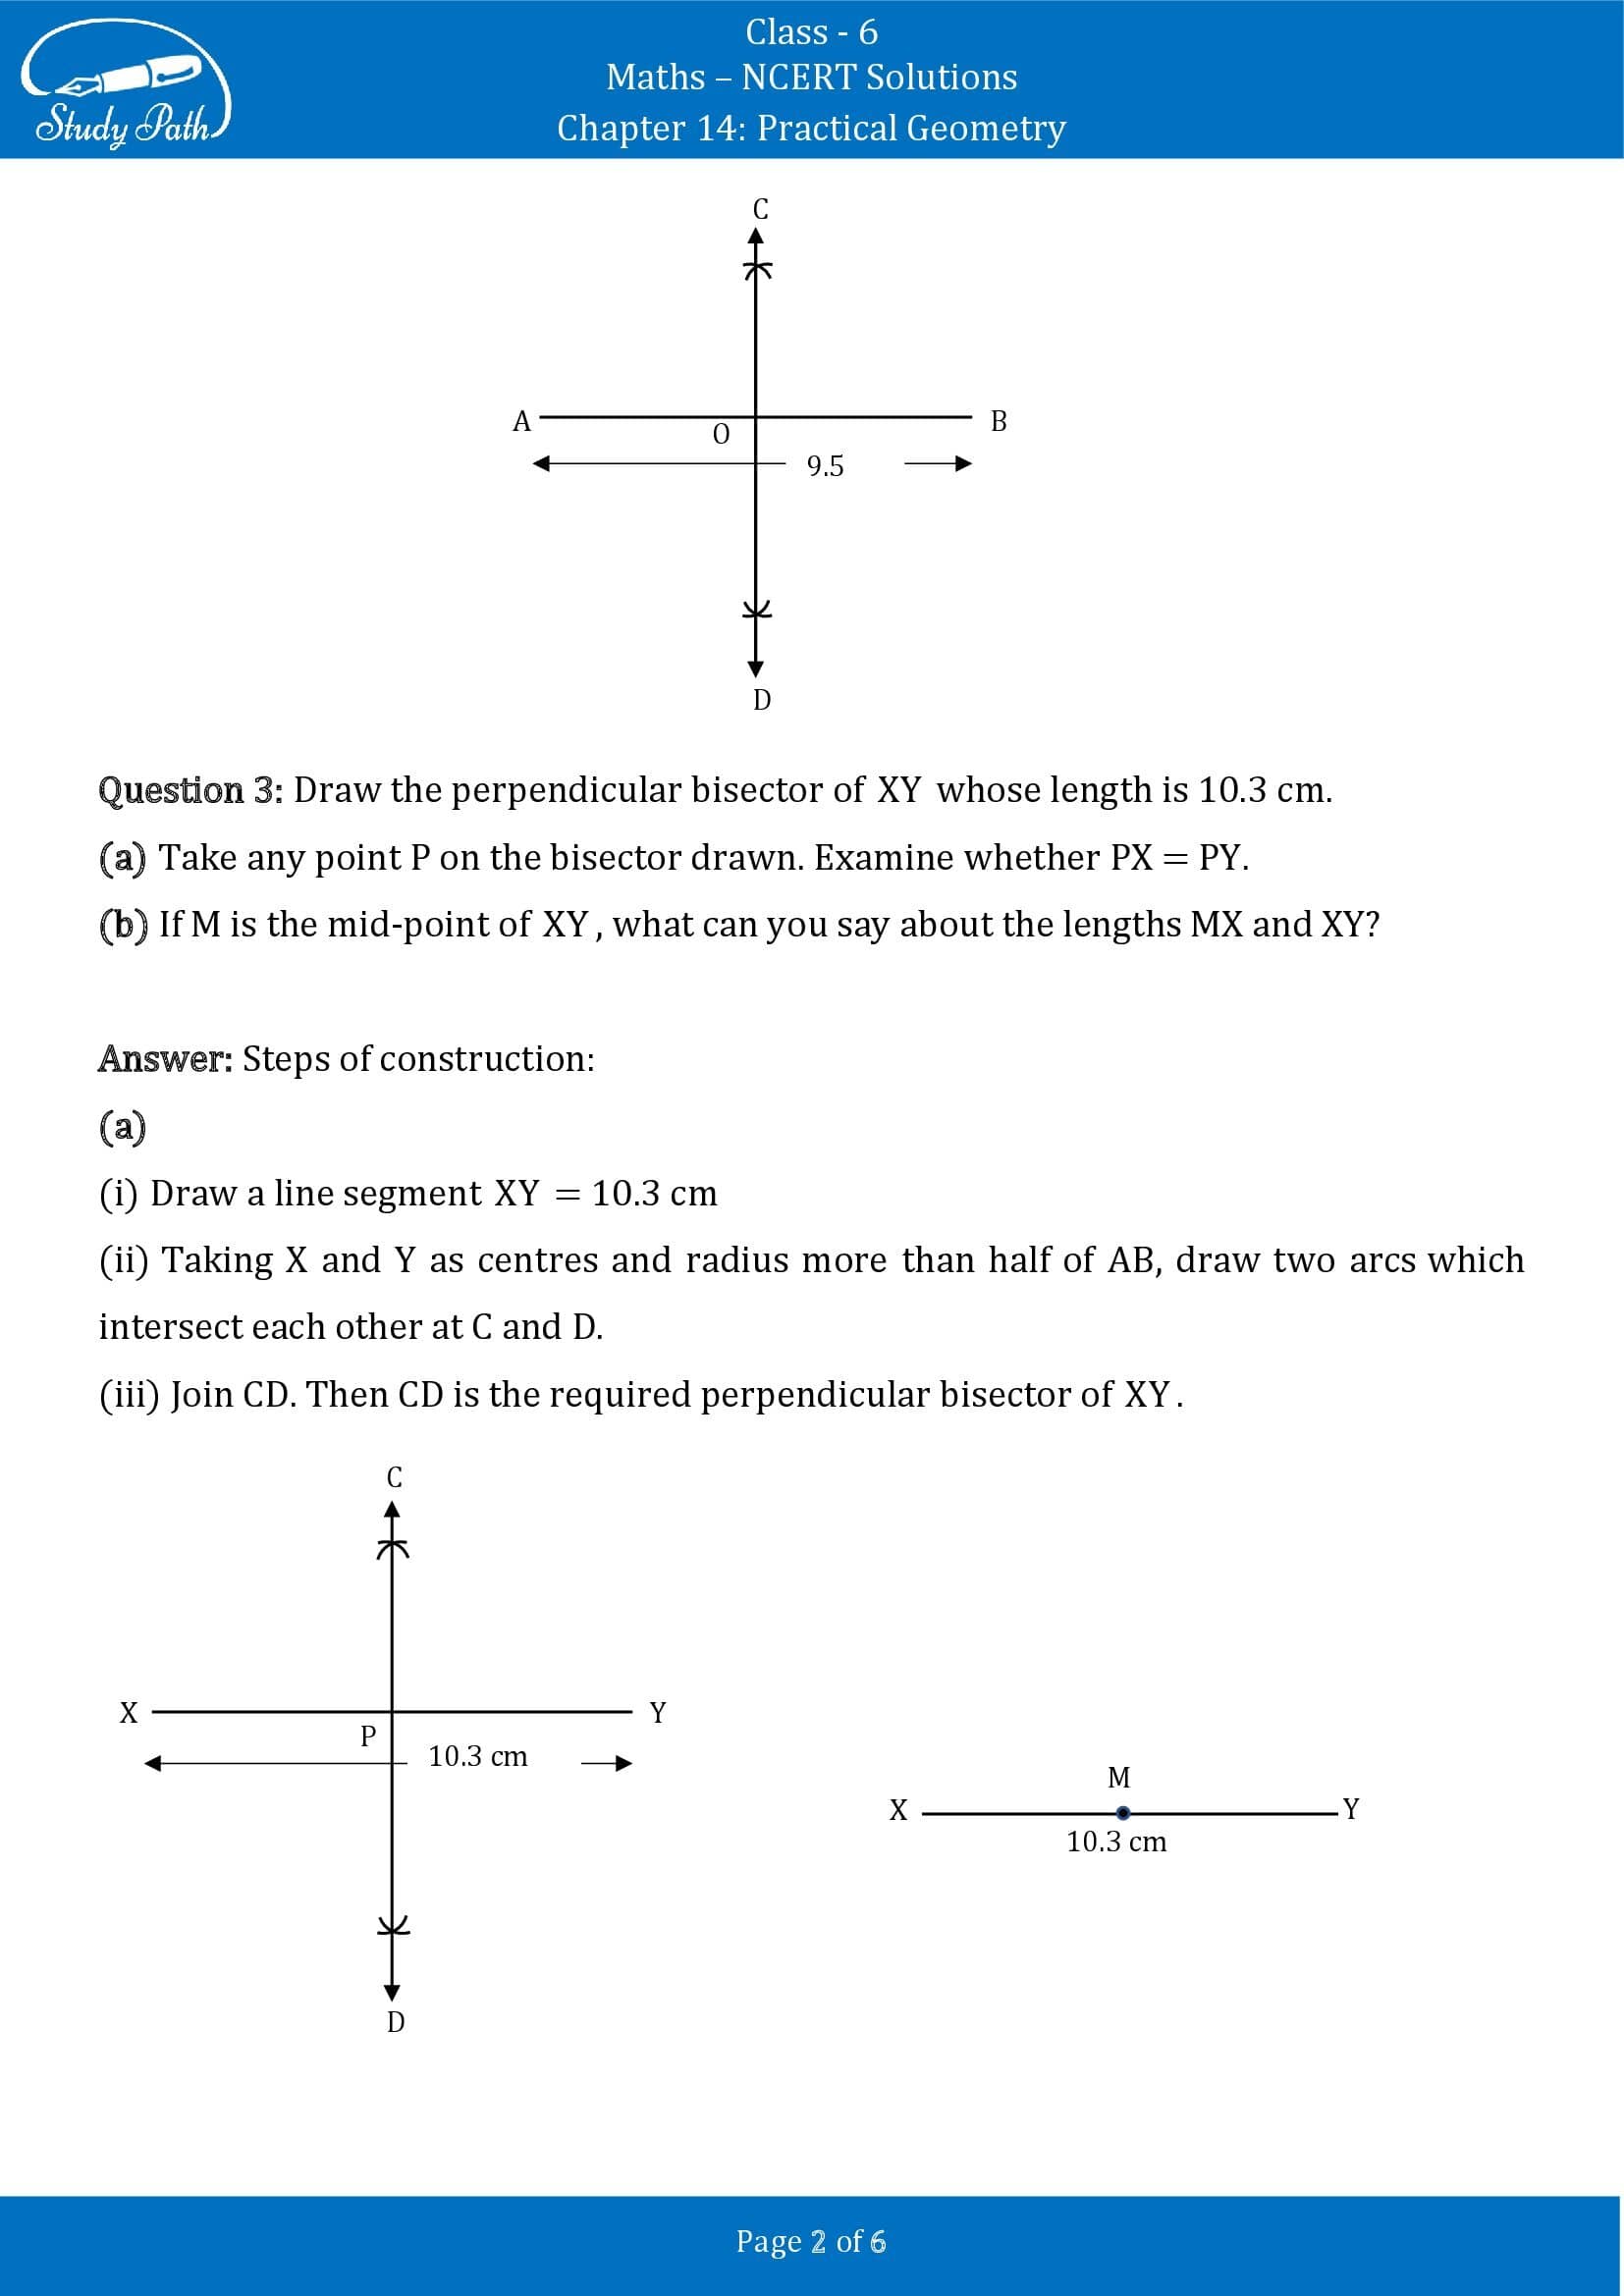 NCERT Solutions for Class 6 Maths Chapter 14 Practical Geometry Exercise 14.5 00002